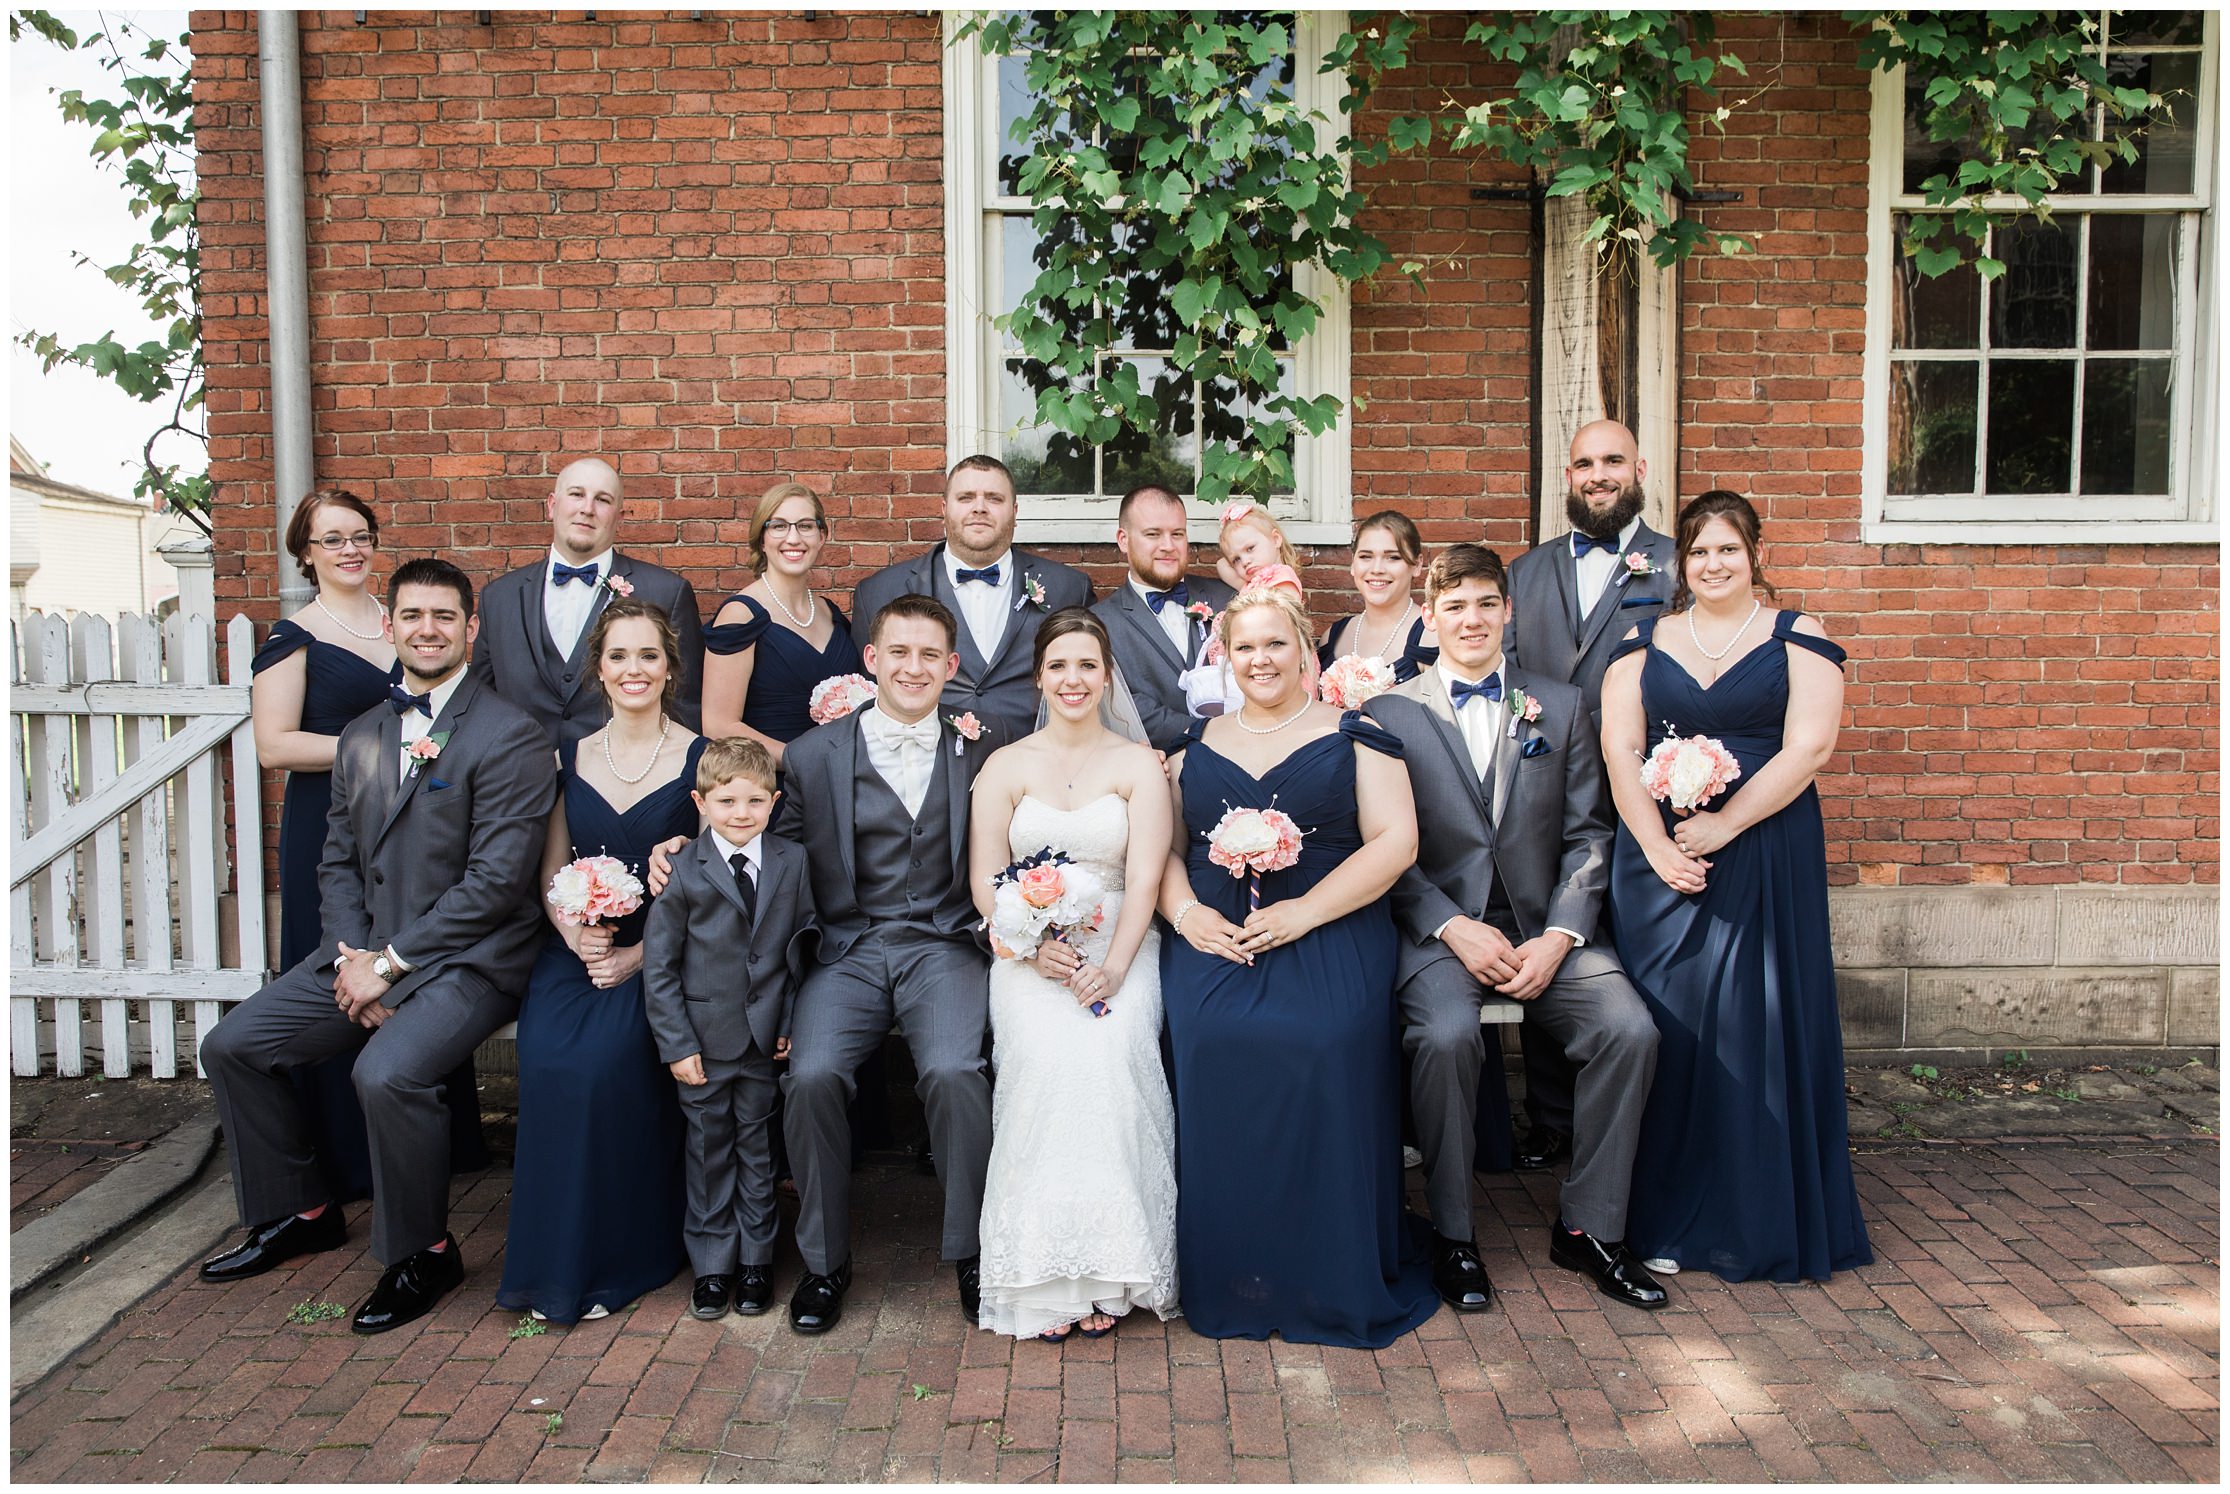 bridal party, blue and coral wedding, grey tuxedo wedding, old economy village, old economy village wedding, old economy village wedding photographer, old economy village wedding photography, rustic wedding photographer, pennsylvania wedding photographer, western pennsylvania wedding photographer, garden wedding, outdoor wedding, outdoor pittsburgh wedding venue, pittsburgh wedding photographer, pittsburgh wedding photography,